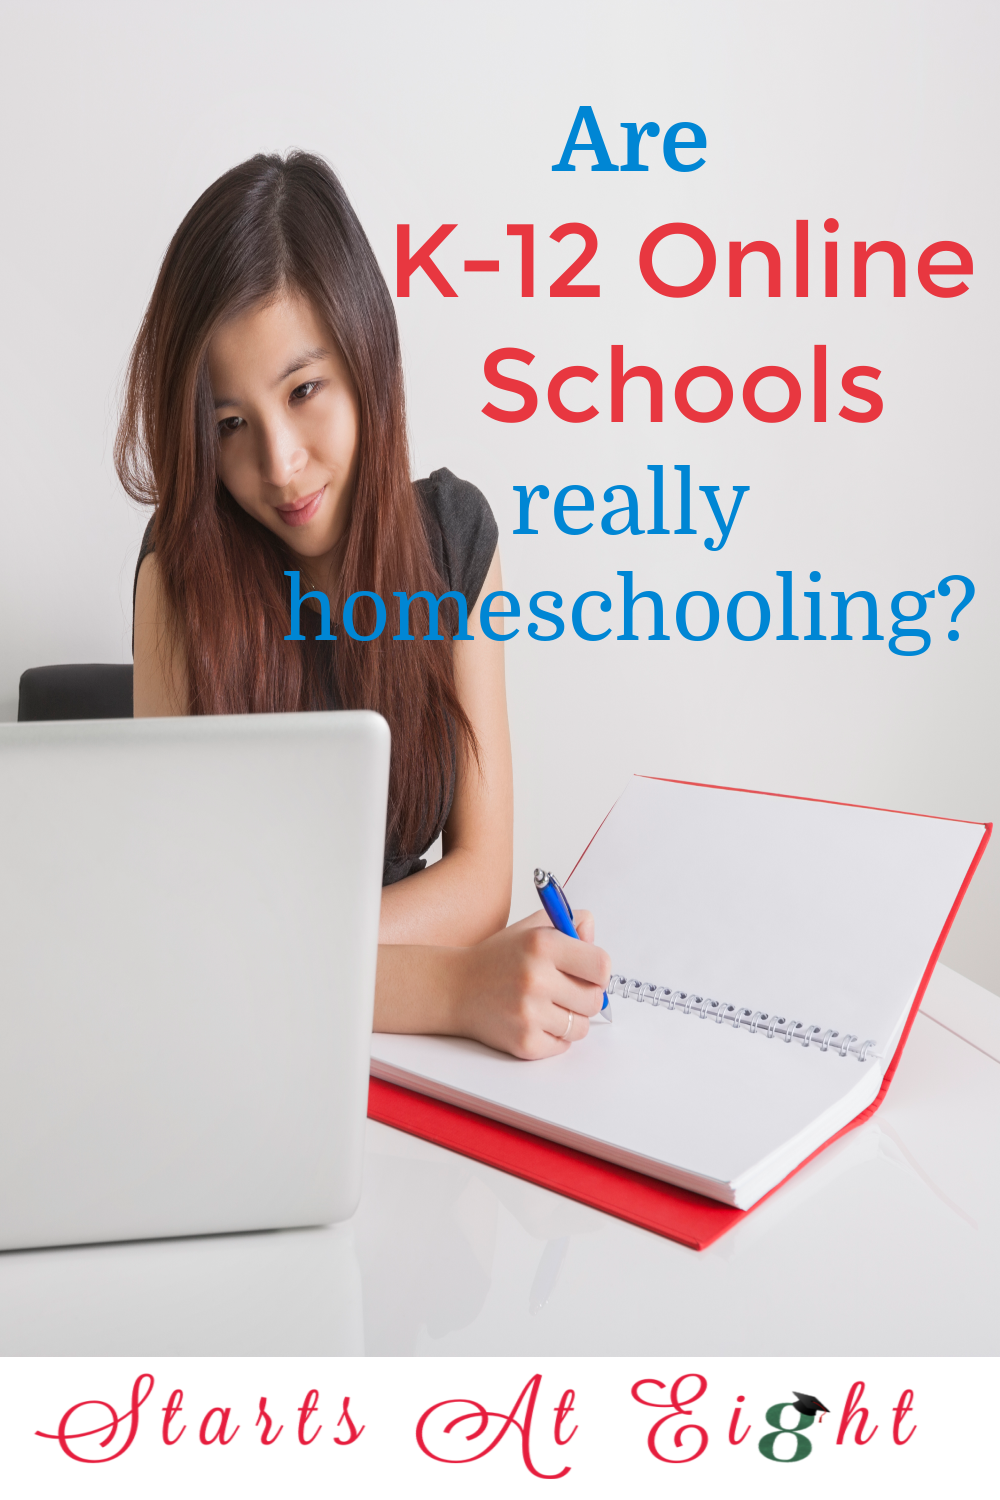 Are K-12 Online Schools Really Homeschooling? I think that depends on your definition. Let's take a look and explore the options.